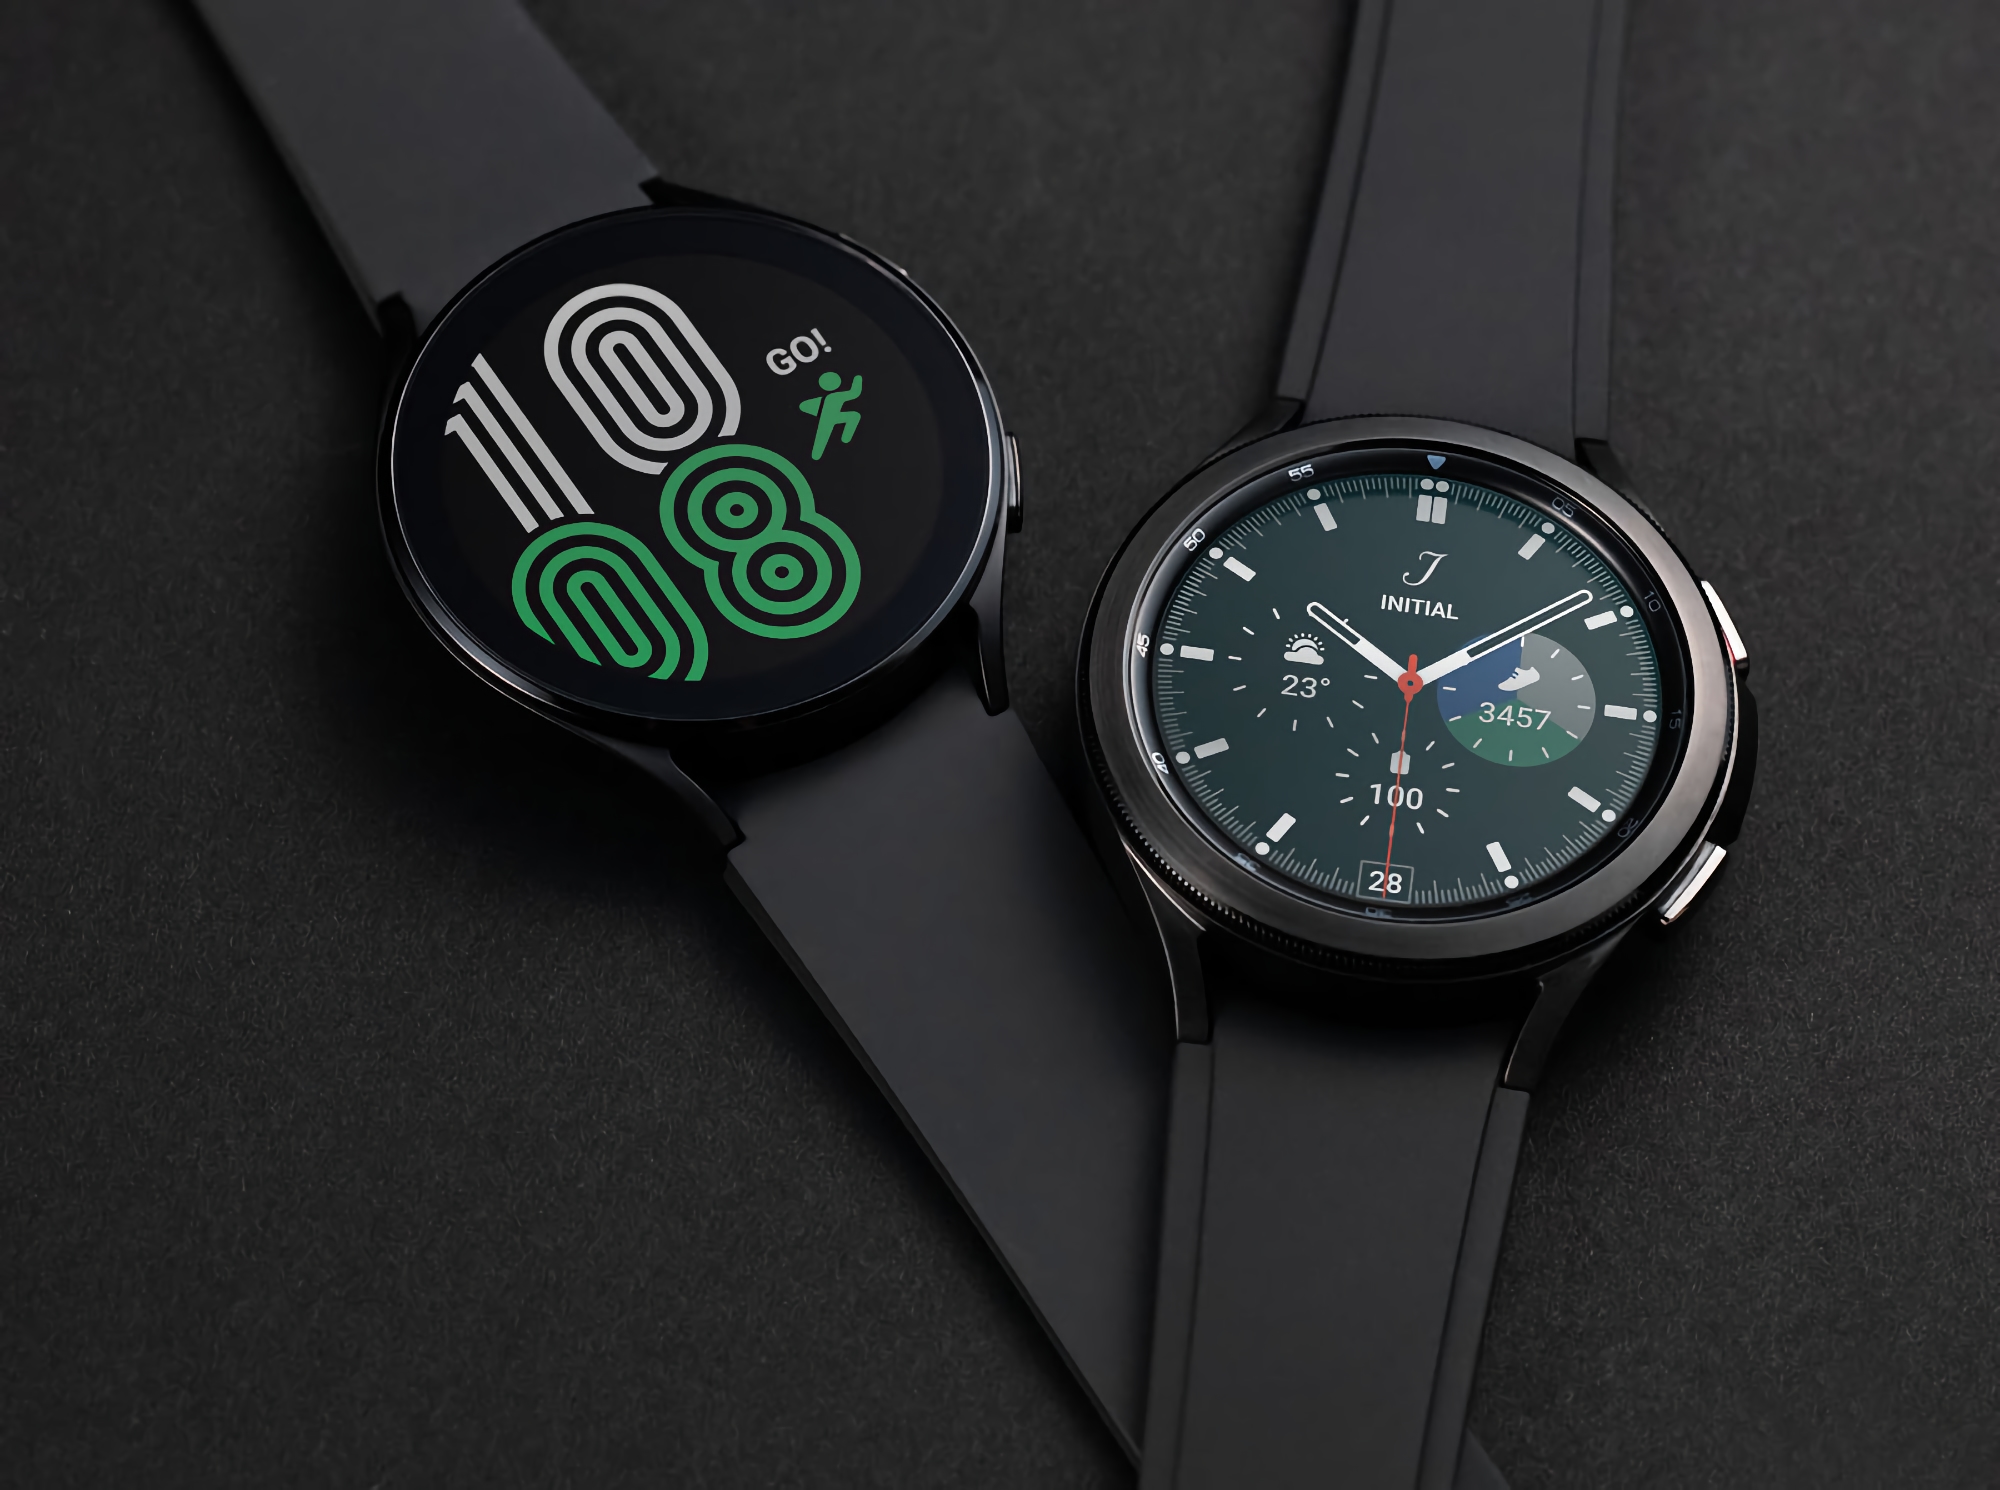 Samsung has released the second beta version of One UI Watch 4.5 for Galaxy Watch 4 and Galaxy Watch 4 Classic